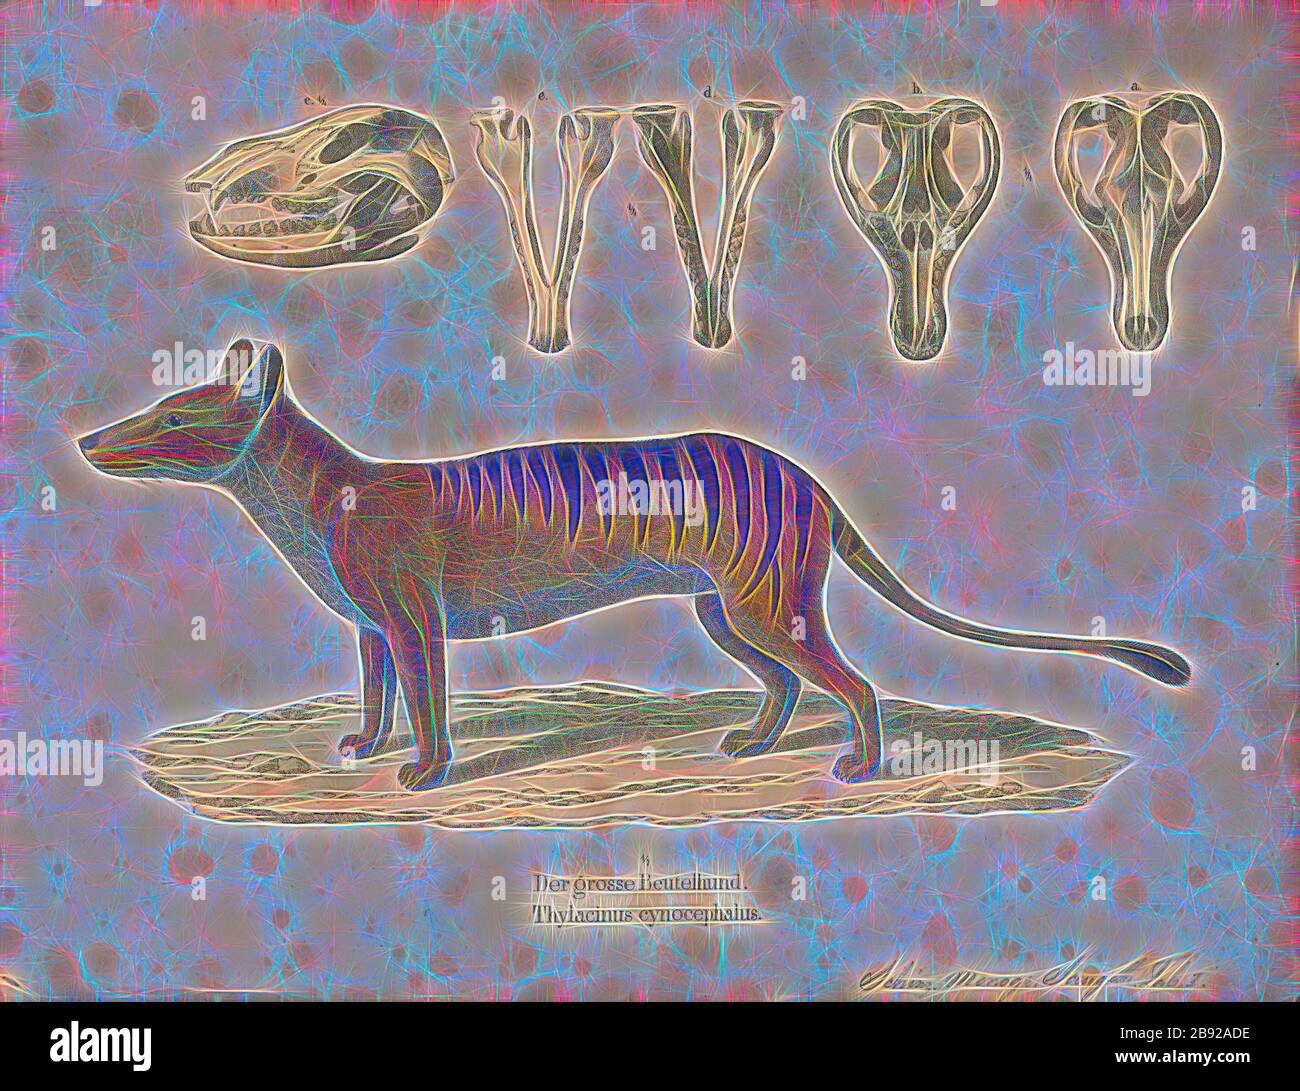 Thylacinus cynocephalus, Print, The thylacine (Thylacinus cynocephalus), now extinct, is one of the largest known carnivorous marsupials, evolving about 4 million years ago. The last known live animal was captured in 1933 in Tasmania. It is commonly known as the Tasmanian tiger because of its striped lower back, or the Tasmanian wolf because of its canid-like characteristics. It was native to Tasmania, New Guinea, and the Australian mainland., 1700-1880, Reimagined by Gibon, design of warm cheerful glowing of brightness and light rays radiance. Classic art reinvented with a modern twist. Photo Stock Photo